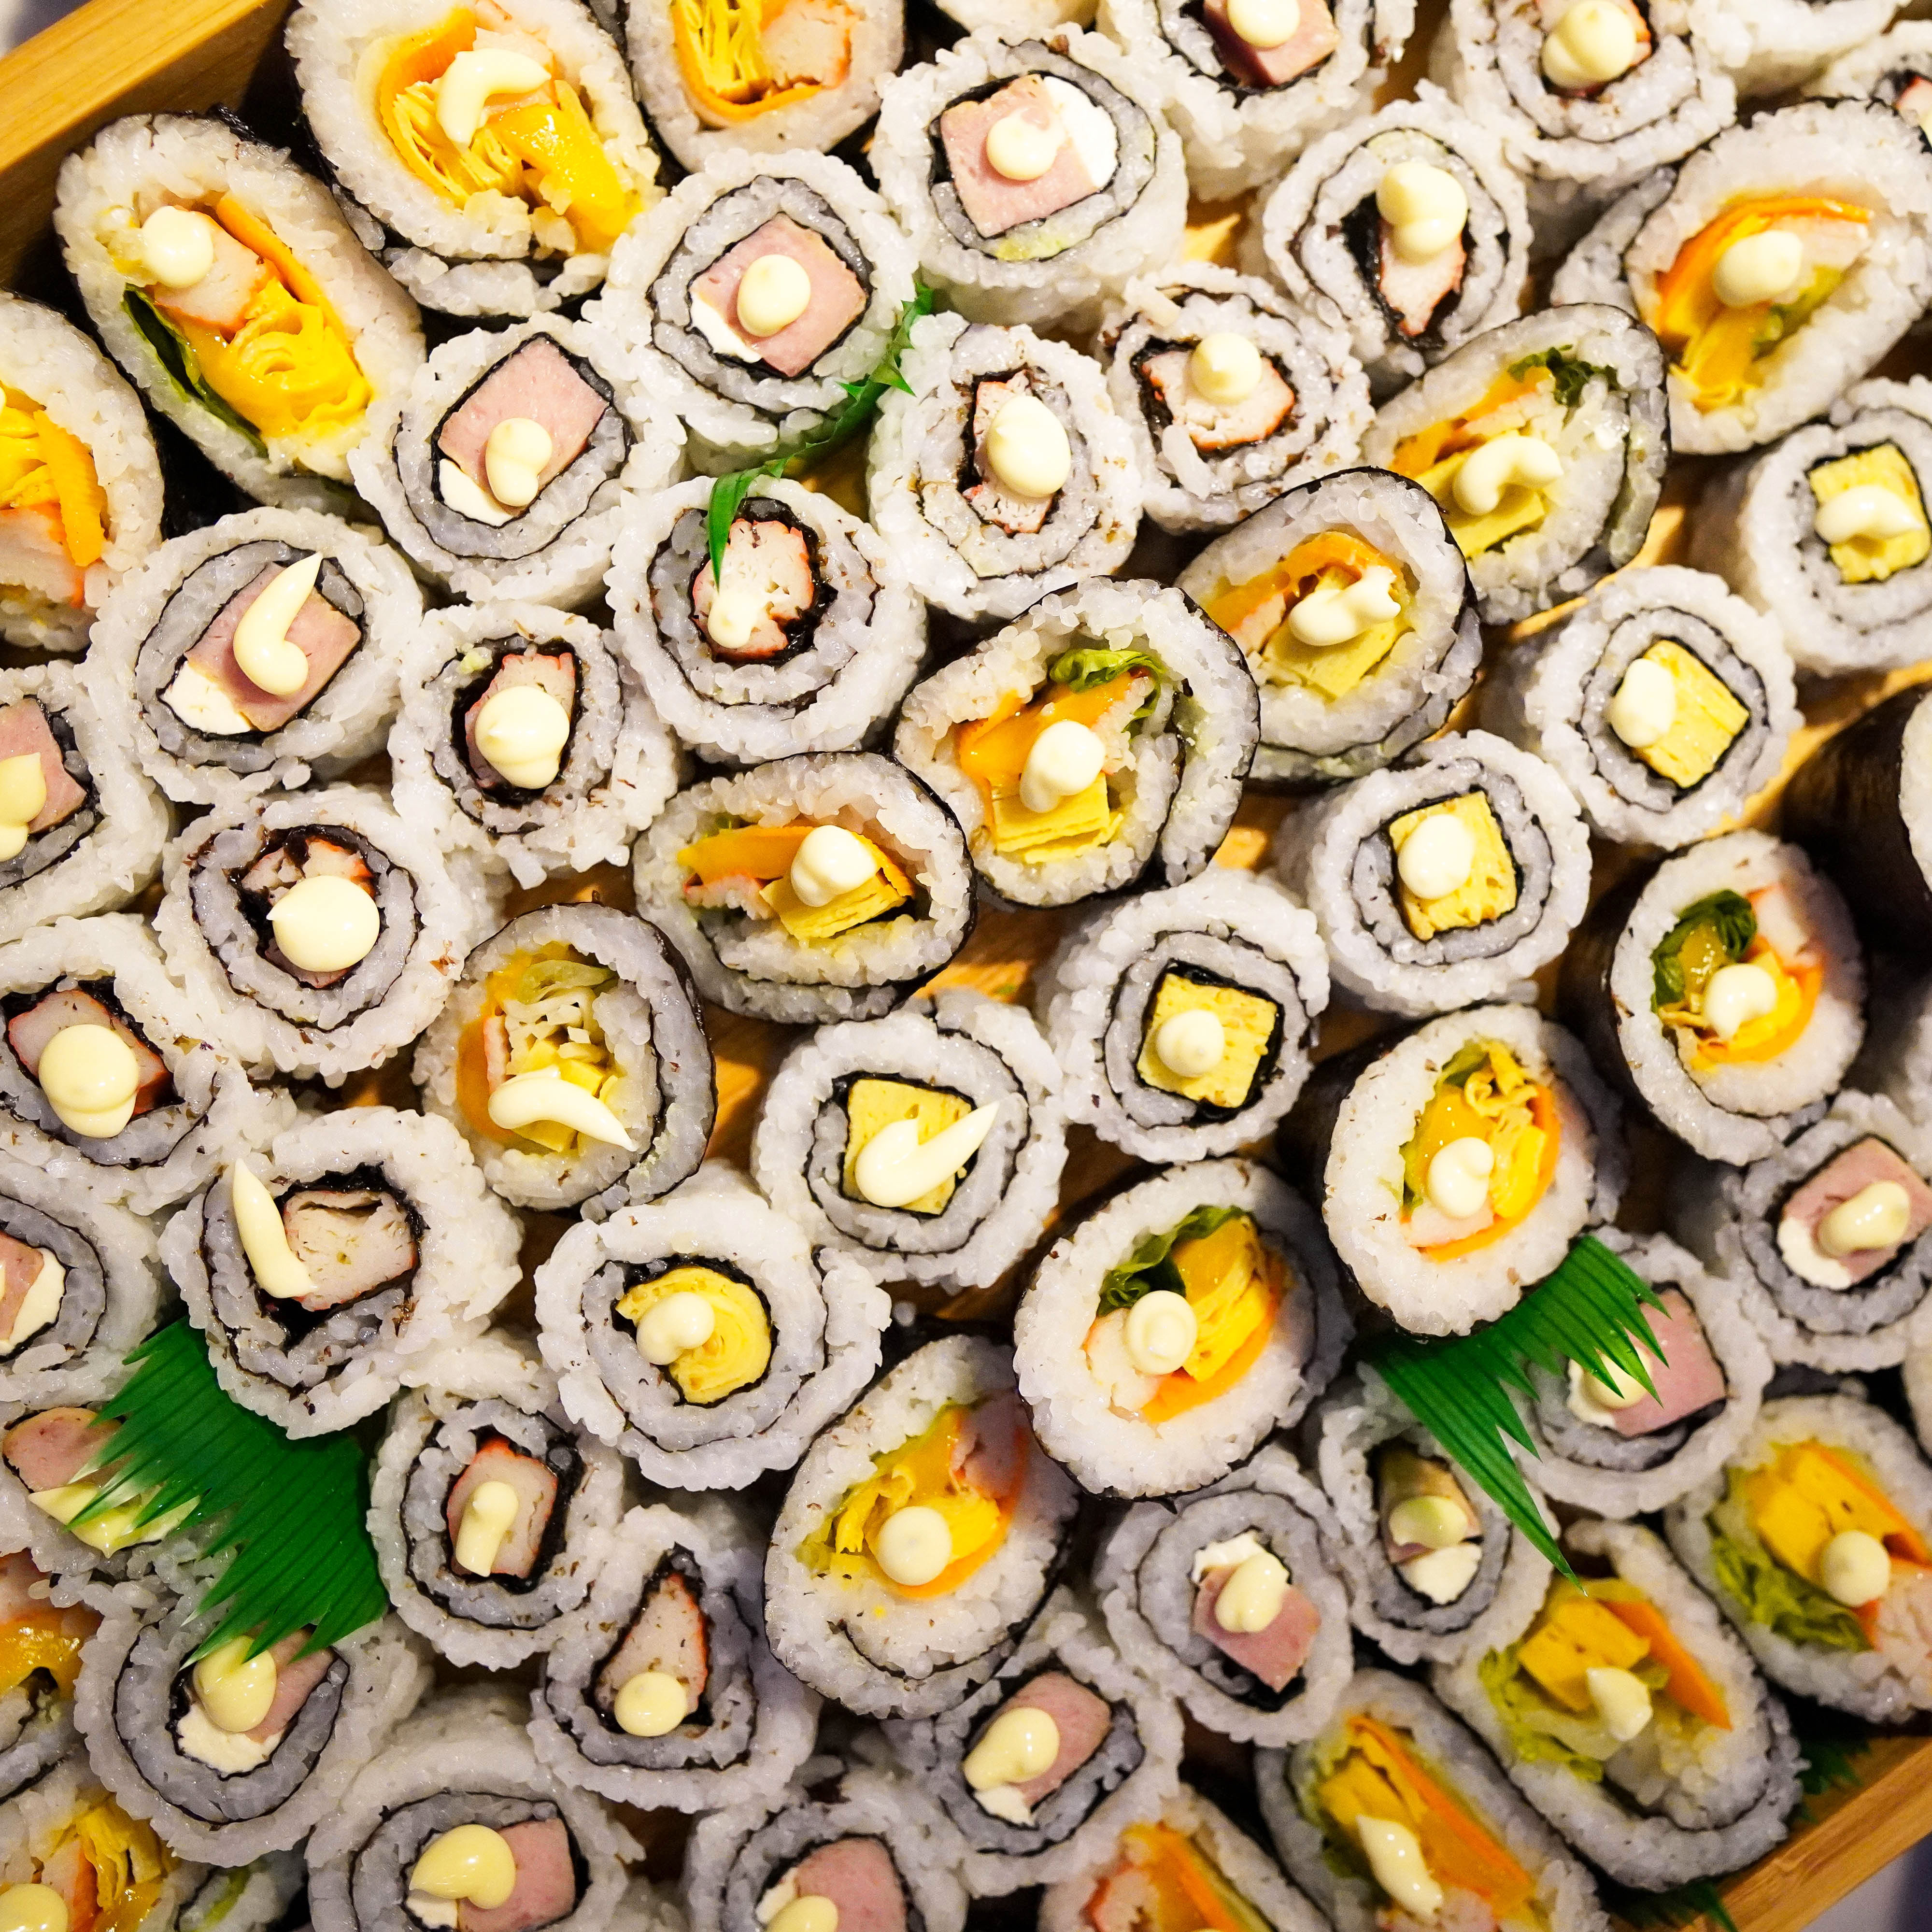 TOWN'S DELIGHT CATERING & EVENTS SUSHI BAR MAKI